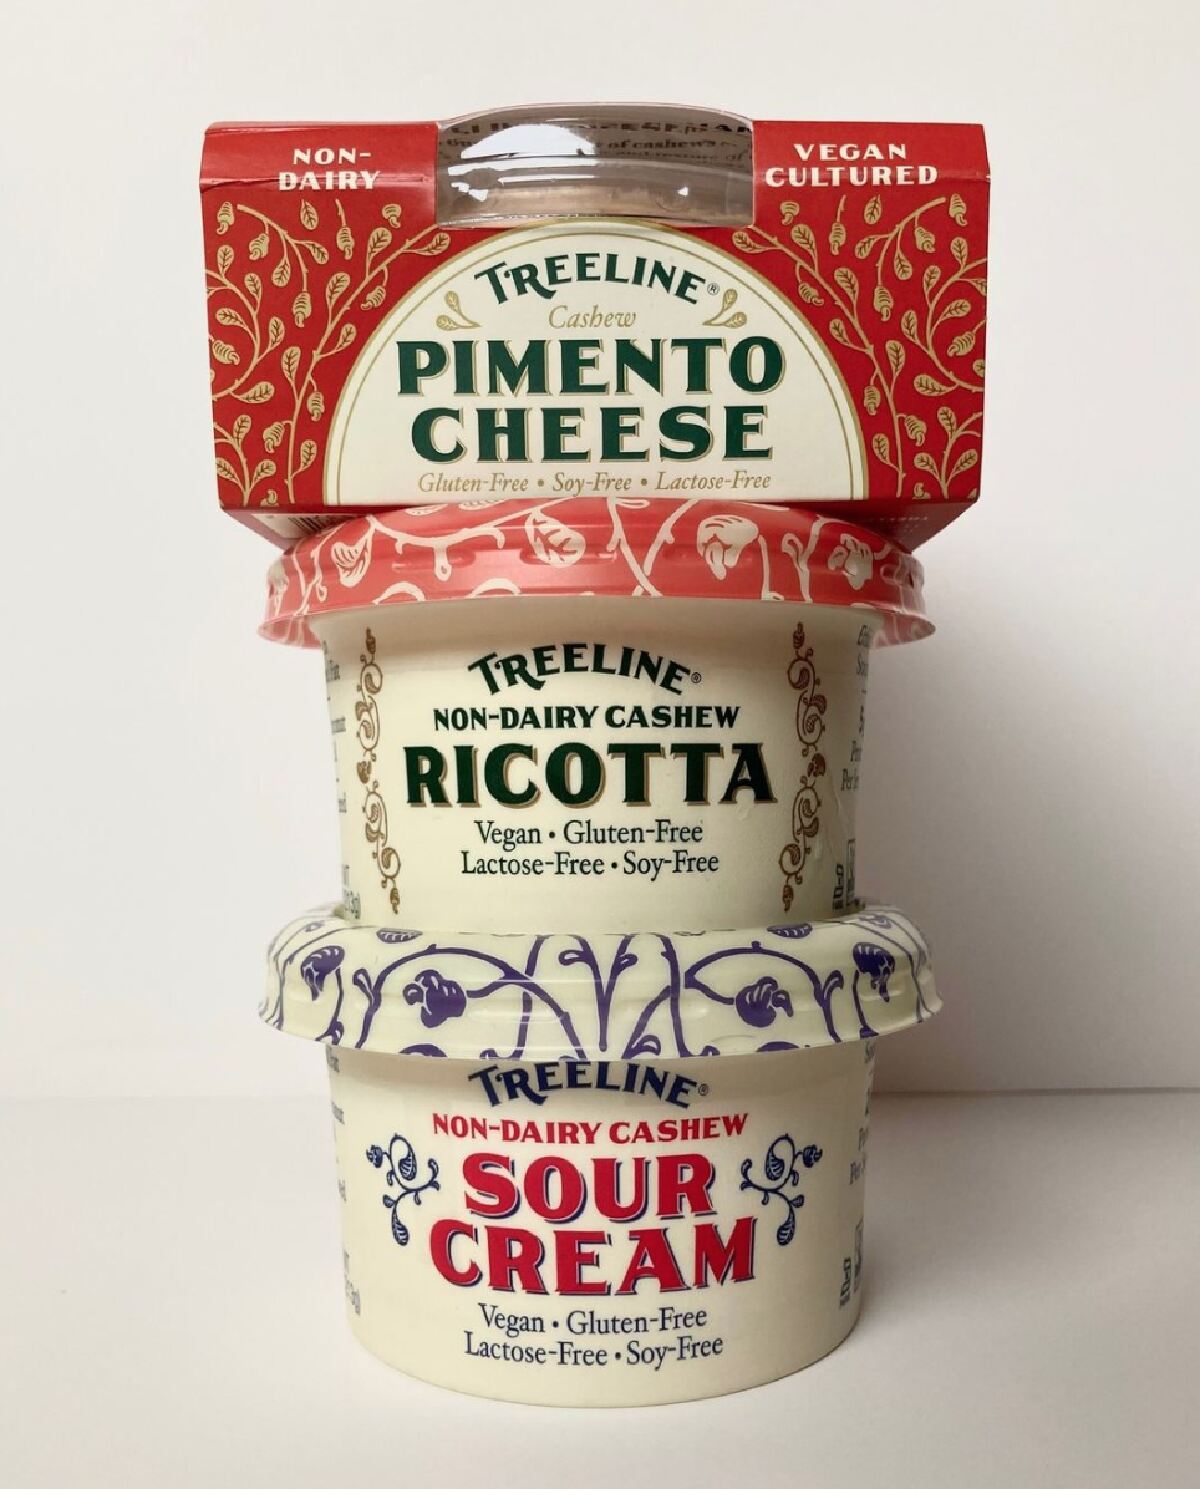 A stack of three containers of Treeline Plant-Based Cheese starting with pimento, then ricotta and finally sour cream on the bottom against a white background. 